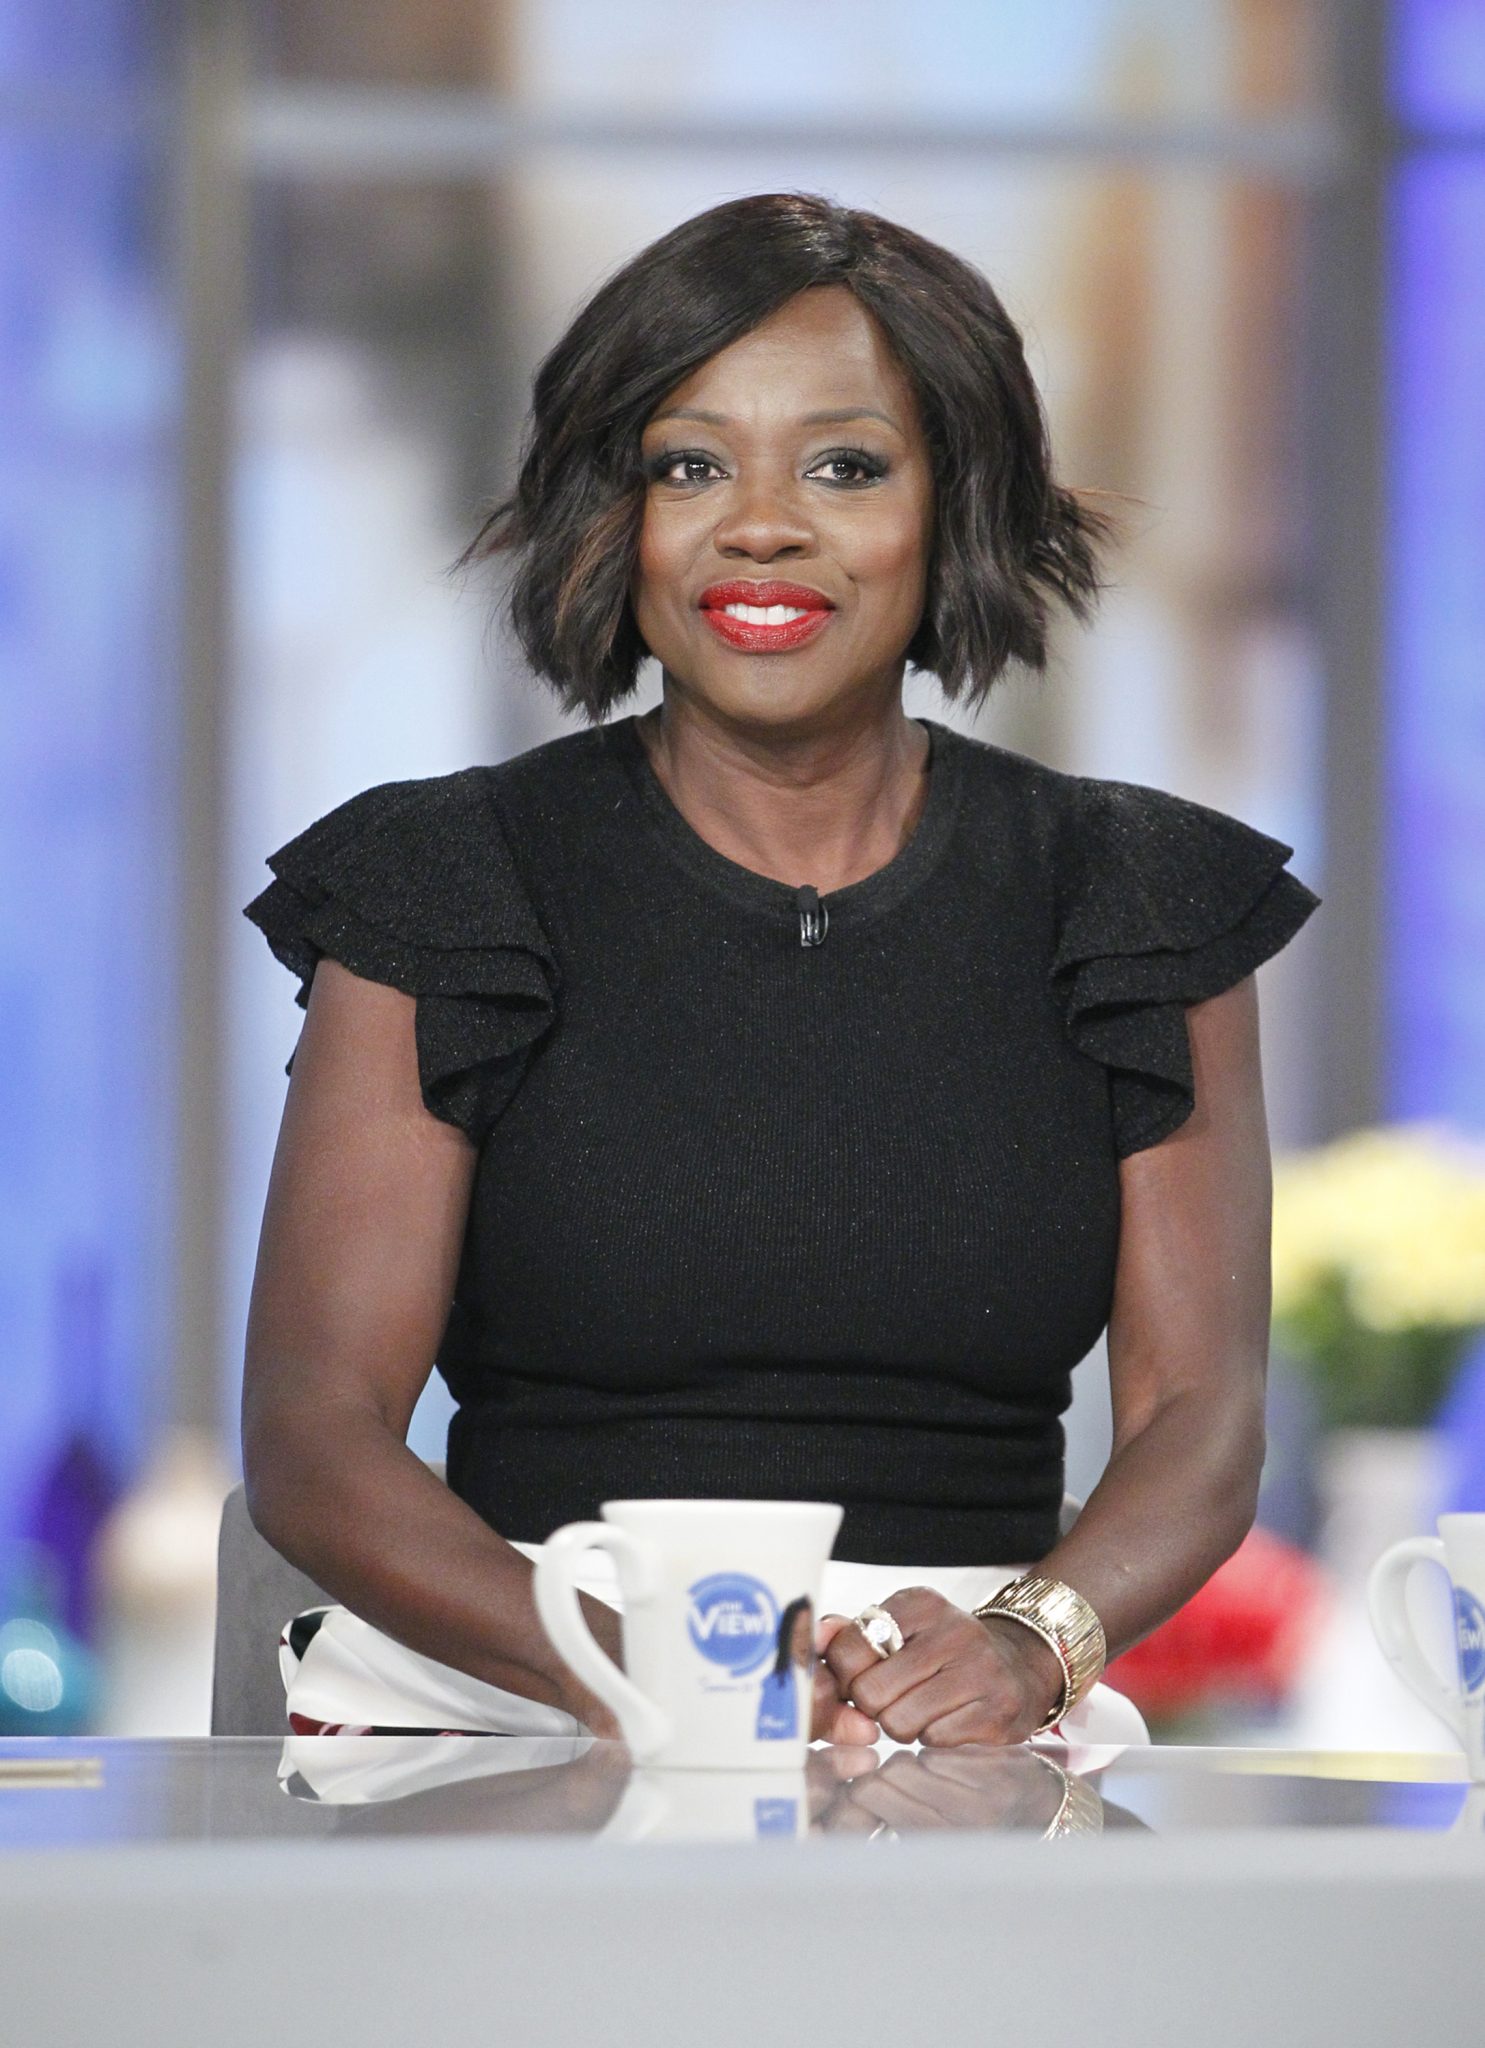 In Case You Missed It: Viola Davis On The View